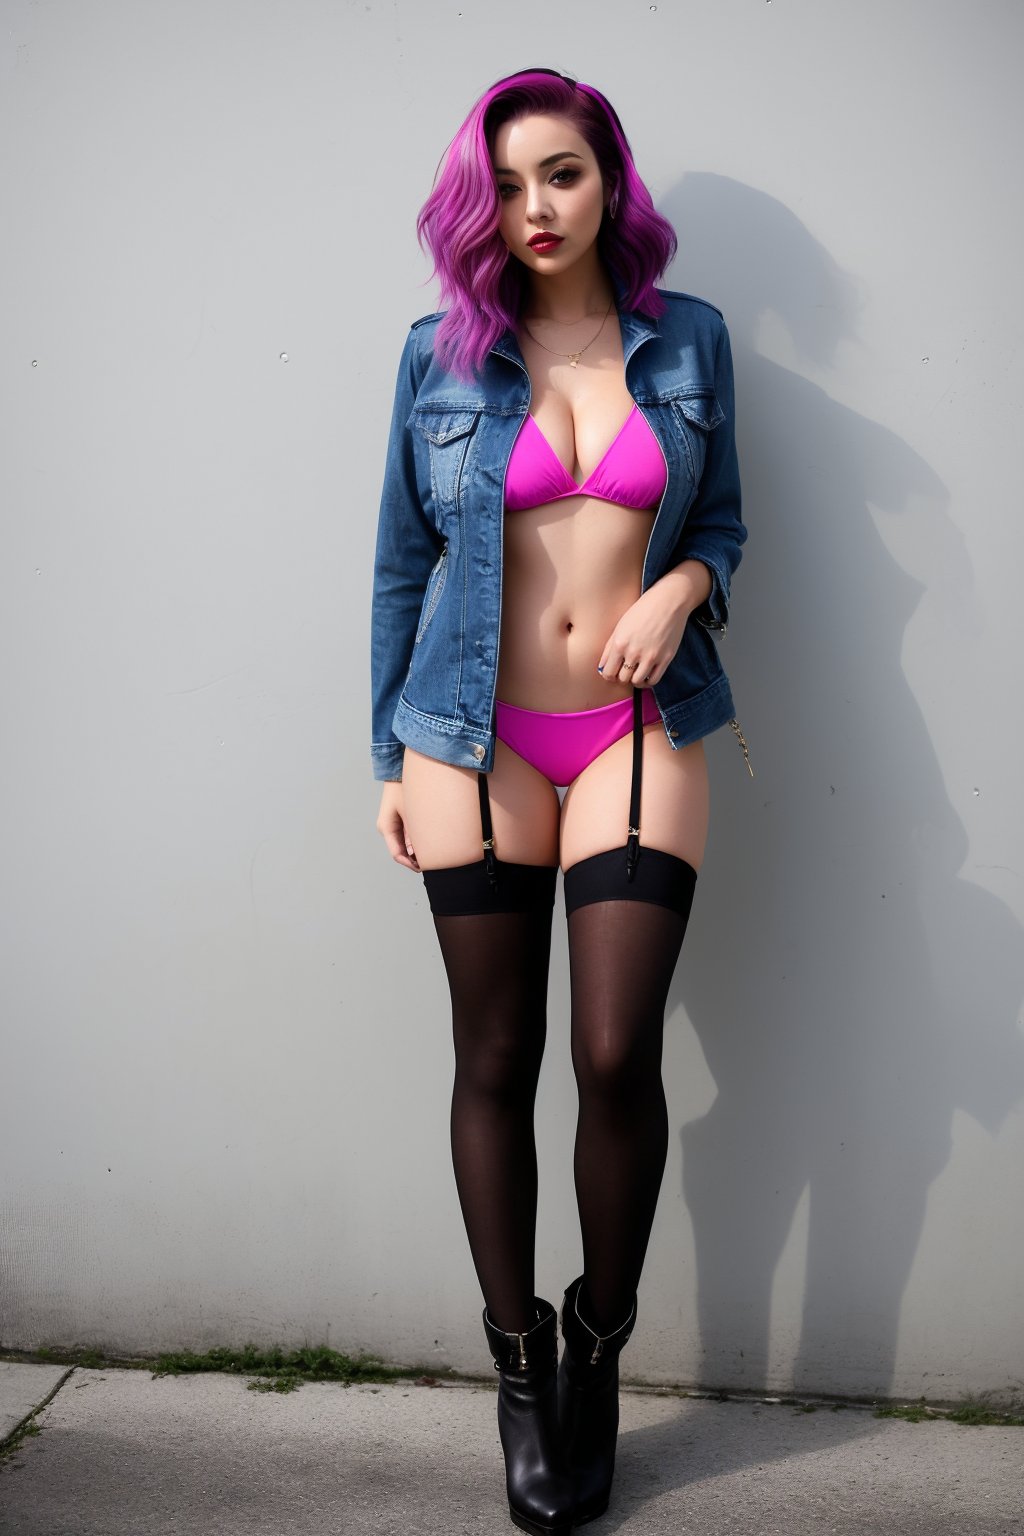 girl, around 25, flaunting her bold style. Her vibrant pink-purple hair cascades down from her shoulders as she stands with her hands behind her back. She wears an open denim jacket, revealing a bright blue bikini underneath. A miniskirt that hugged her curves, black stockings and dark brown boots added an edgy edge to her look, giving her a perfect figure